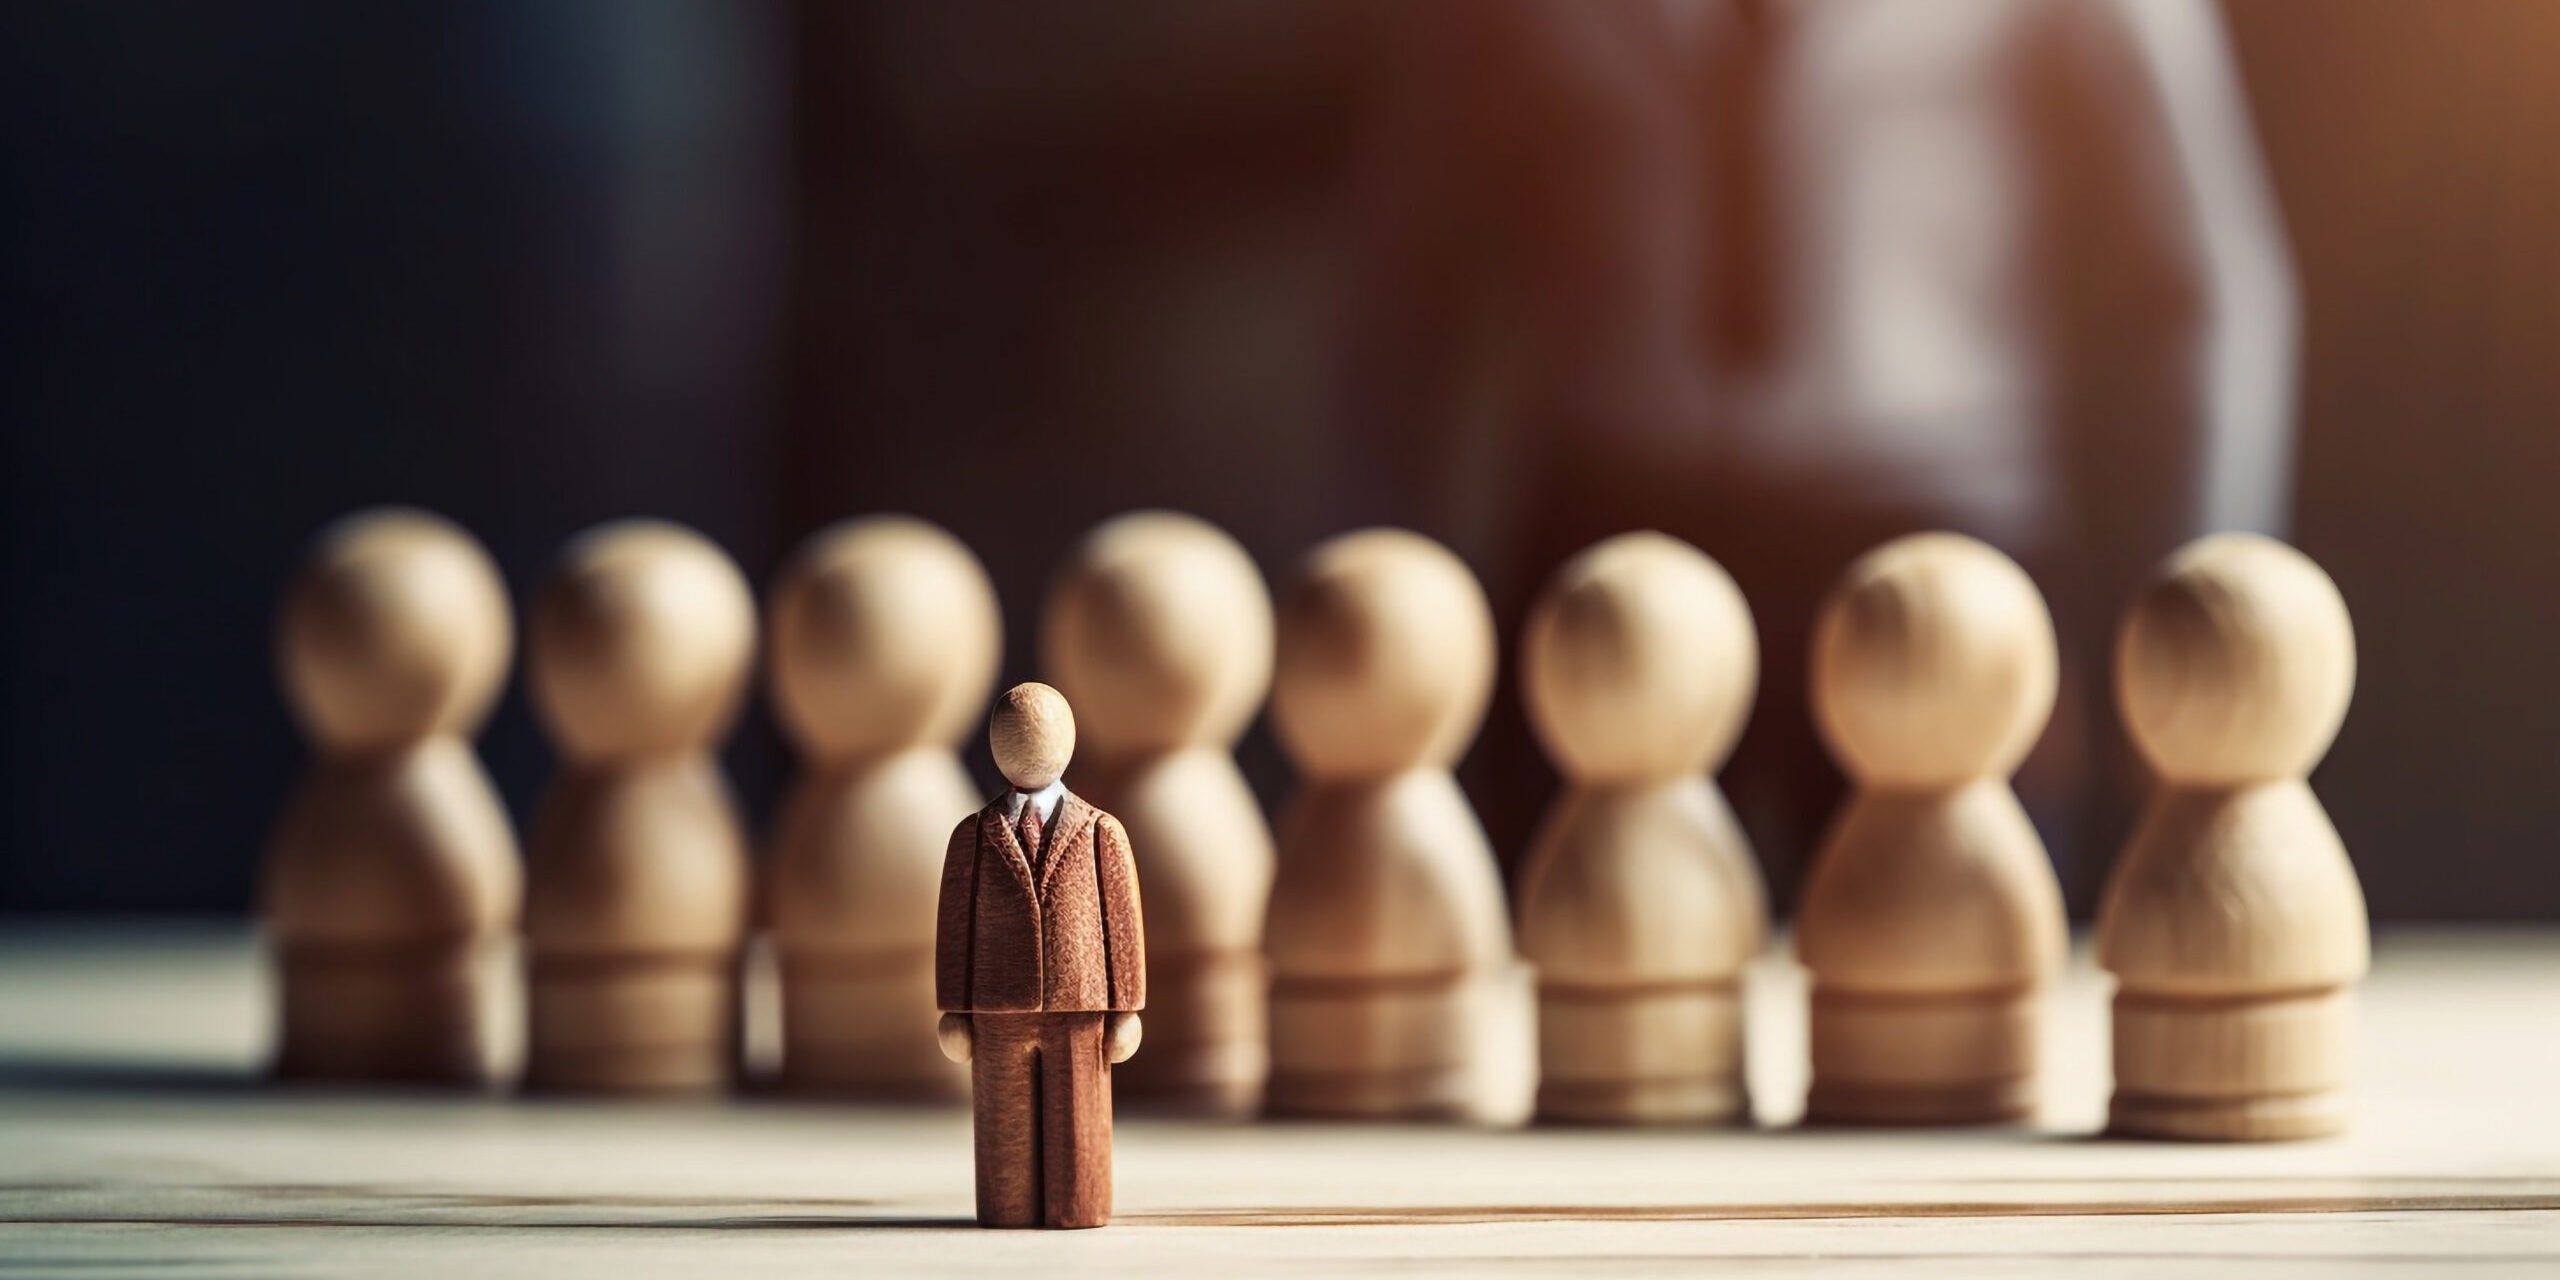 Chess pieces aligned in strategic business moves generated by artificial intelligence